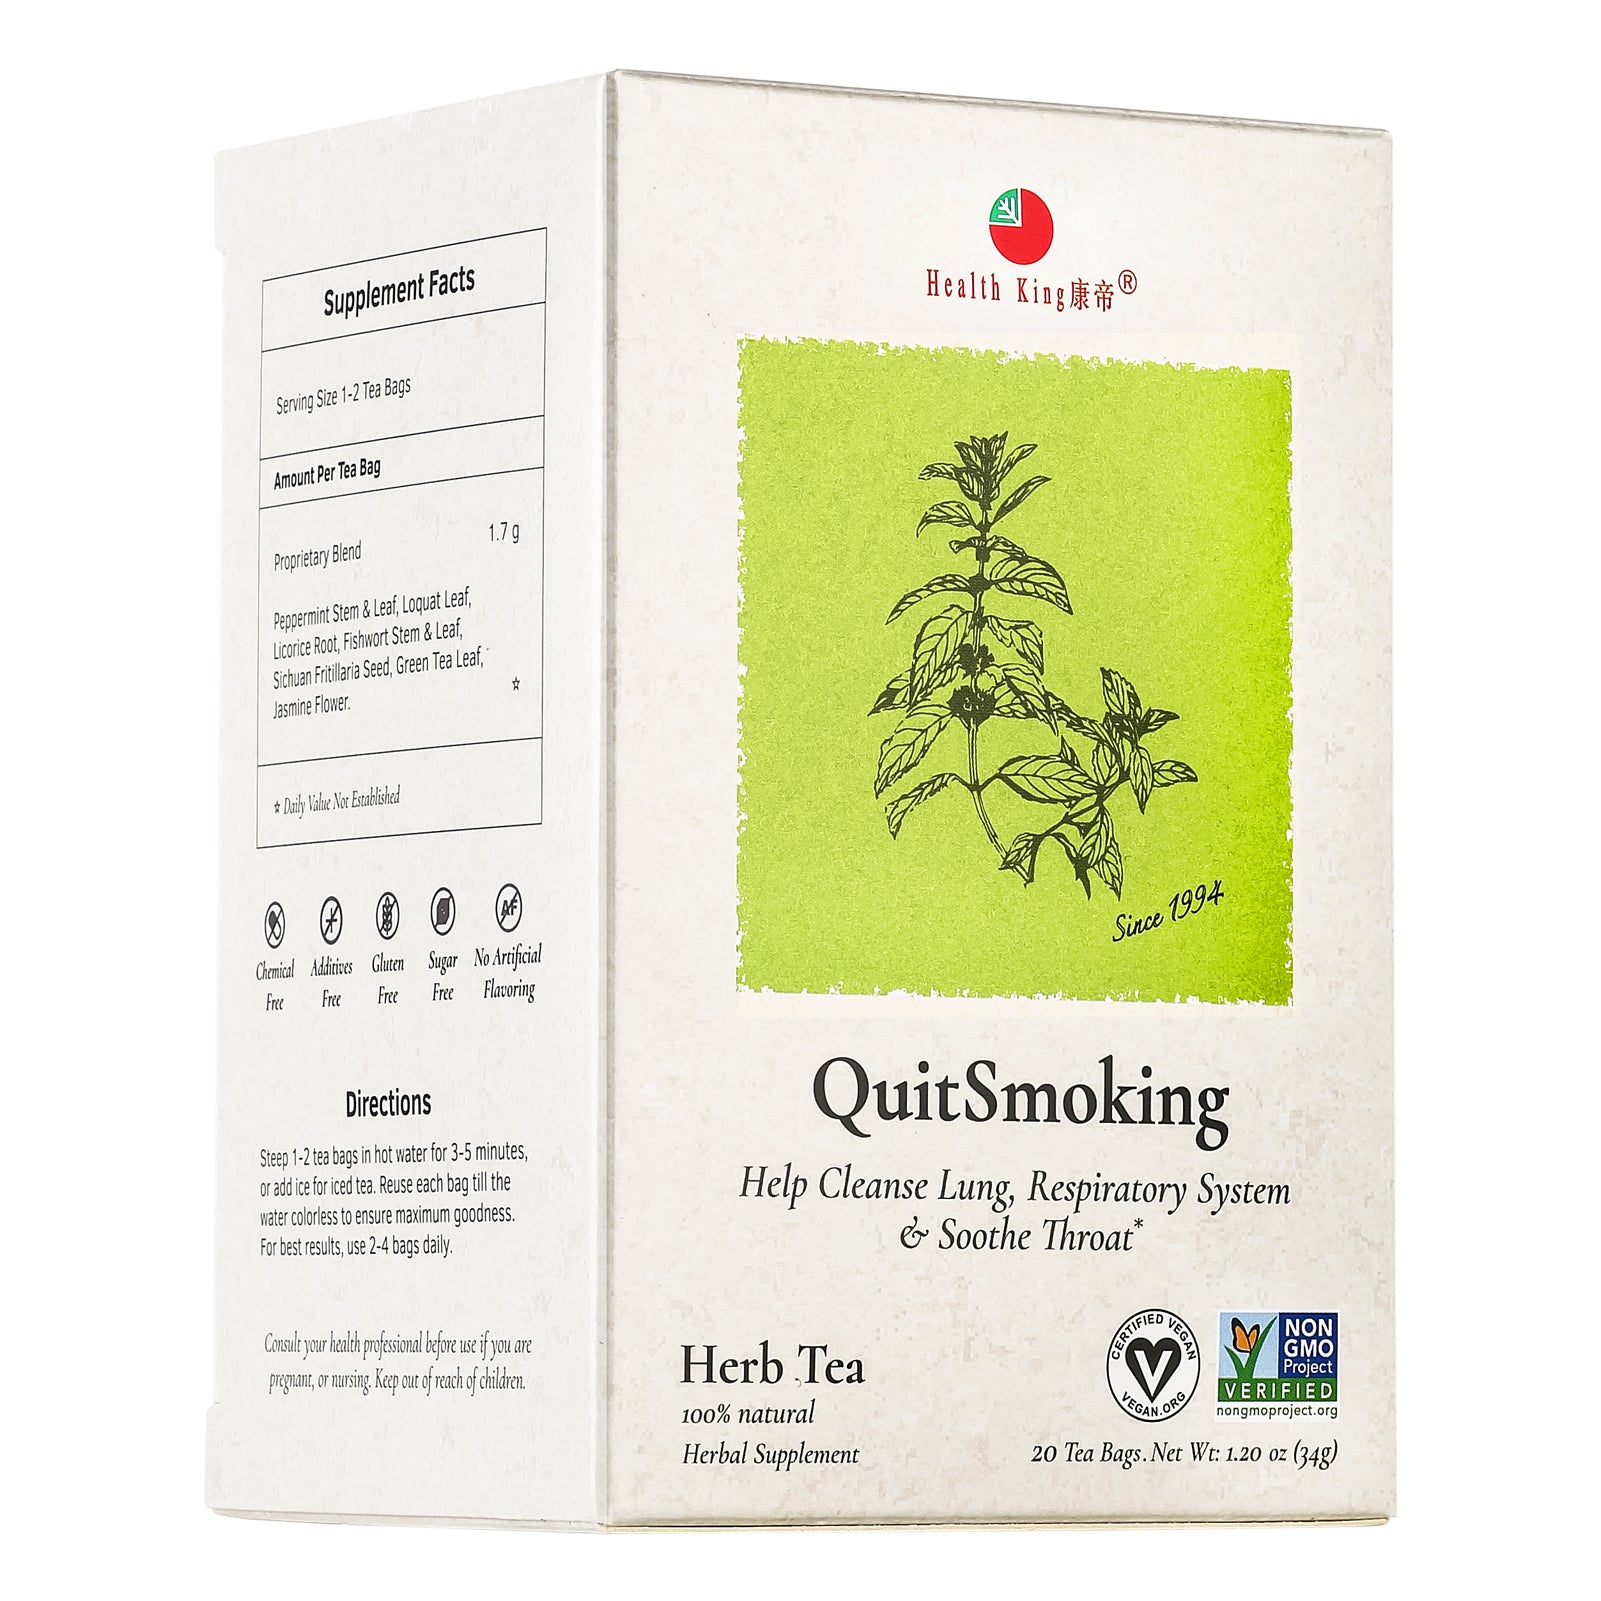 Quit Smoking Herb Tea | Help Cleanse Lung, Respiratory System & Soothe Throat